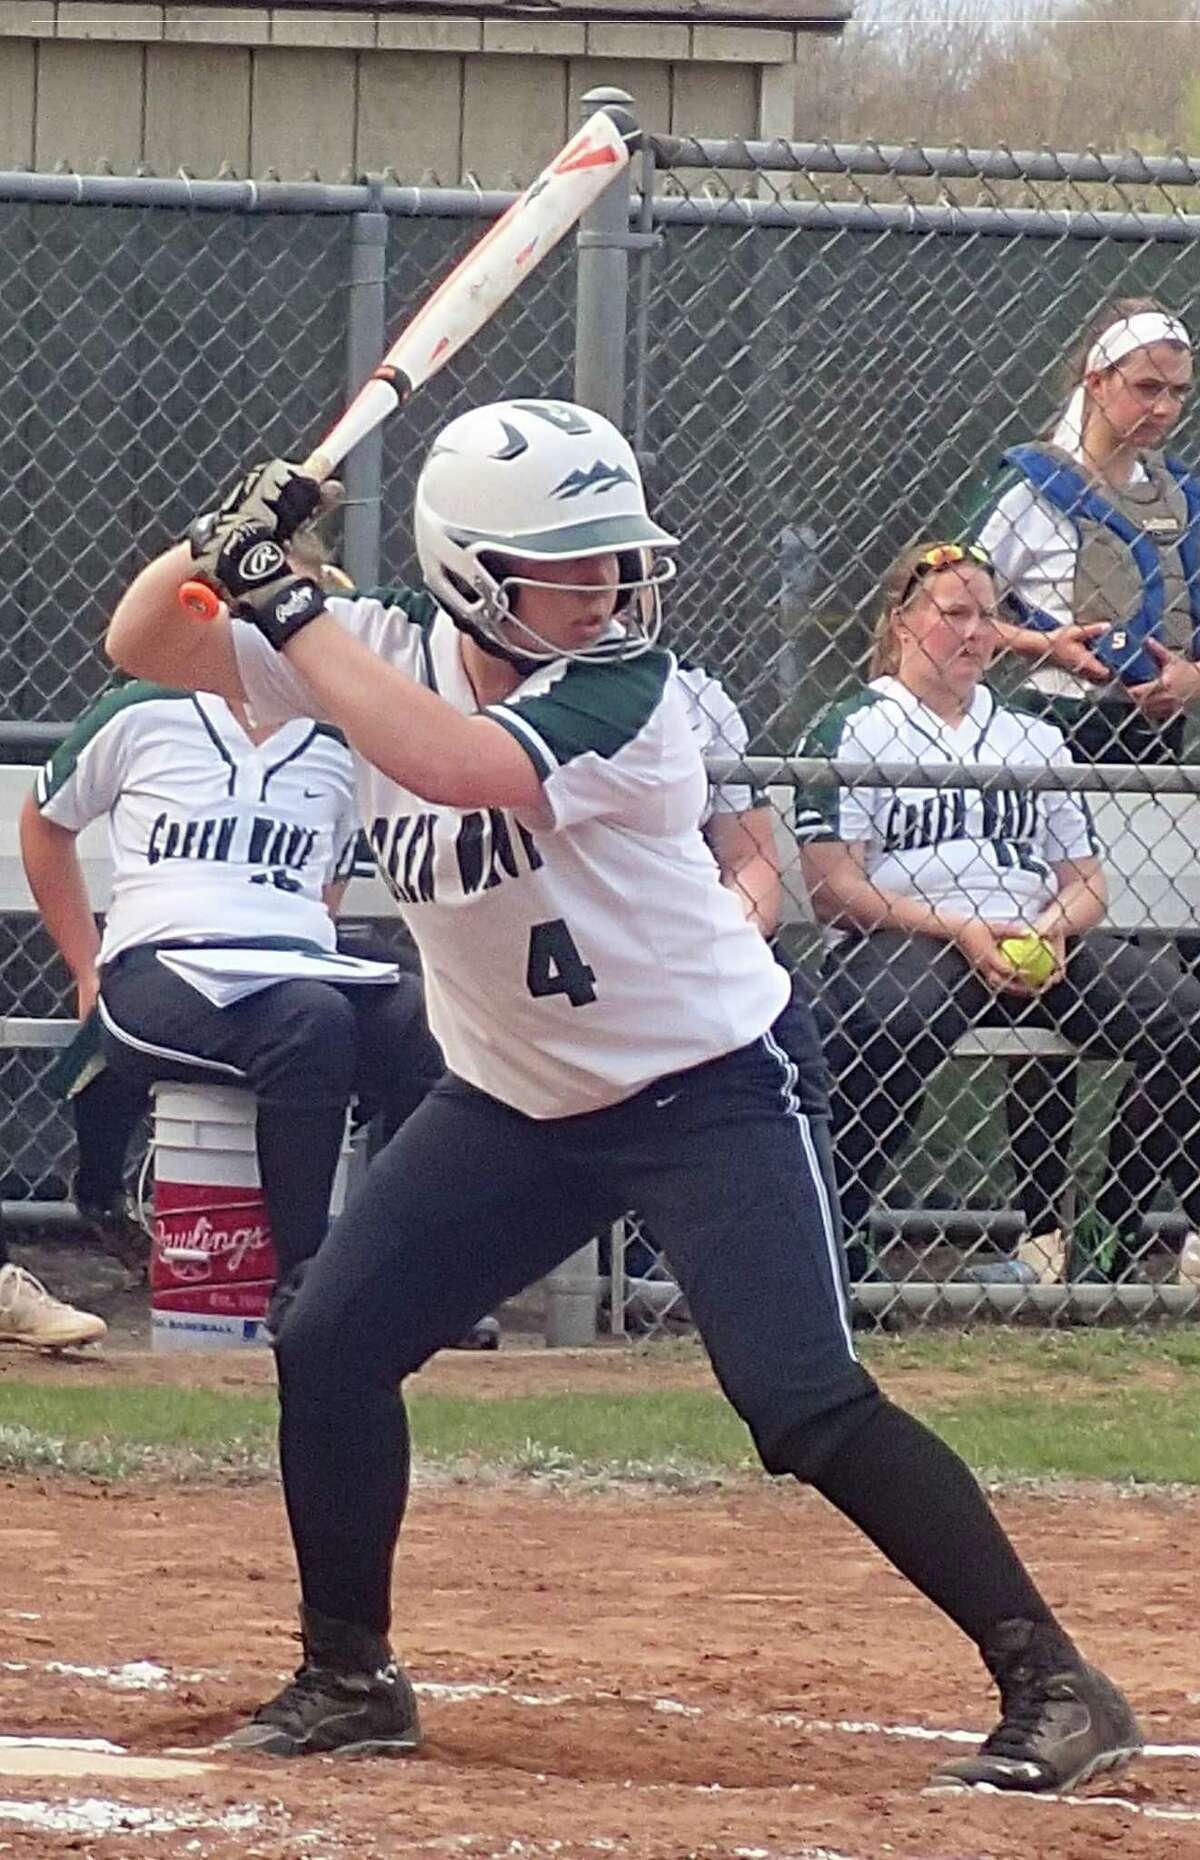 New Milford shortstop Avery Kelly had a home run, a triple and two doubles in the Green Wave's 9-2 softball victory over Bunnell at New Milford High School on April 25, 2016.